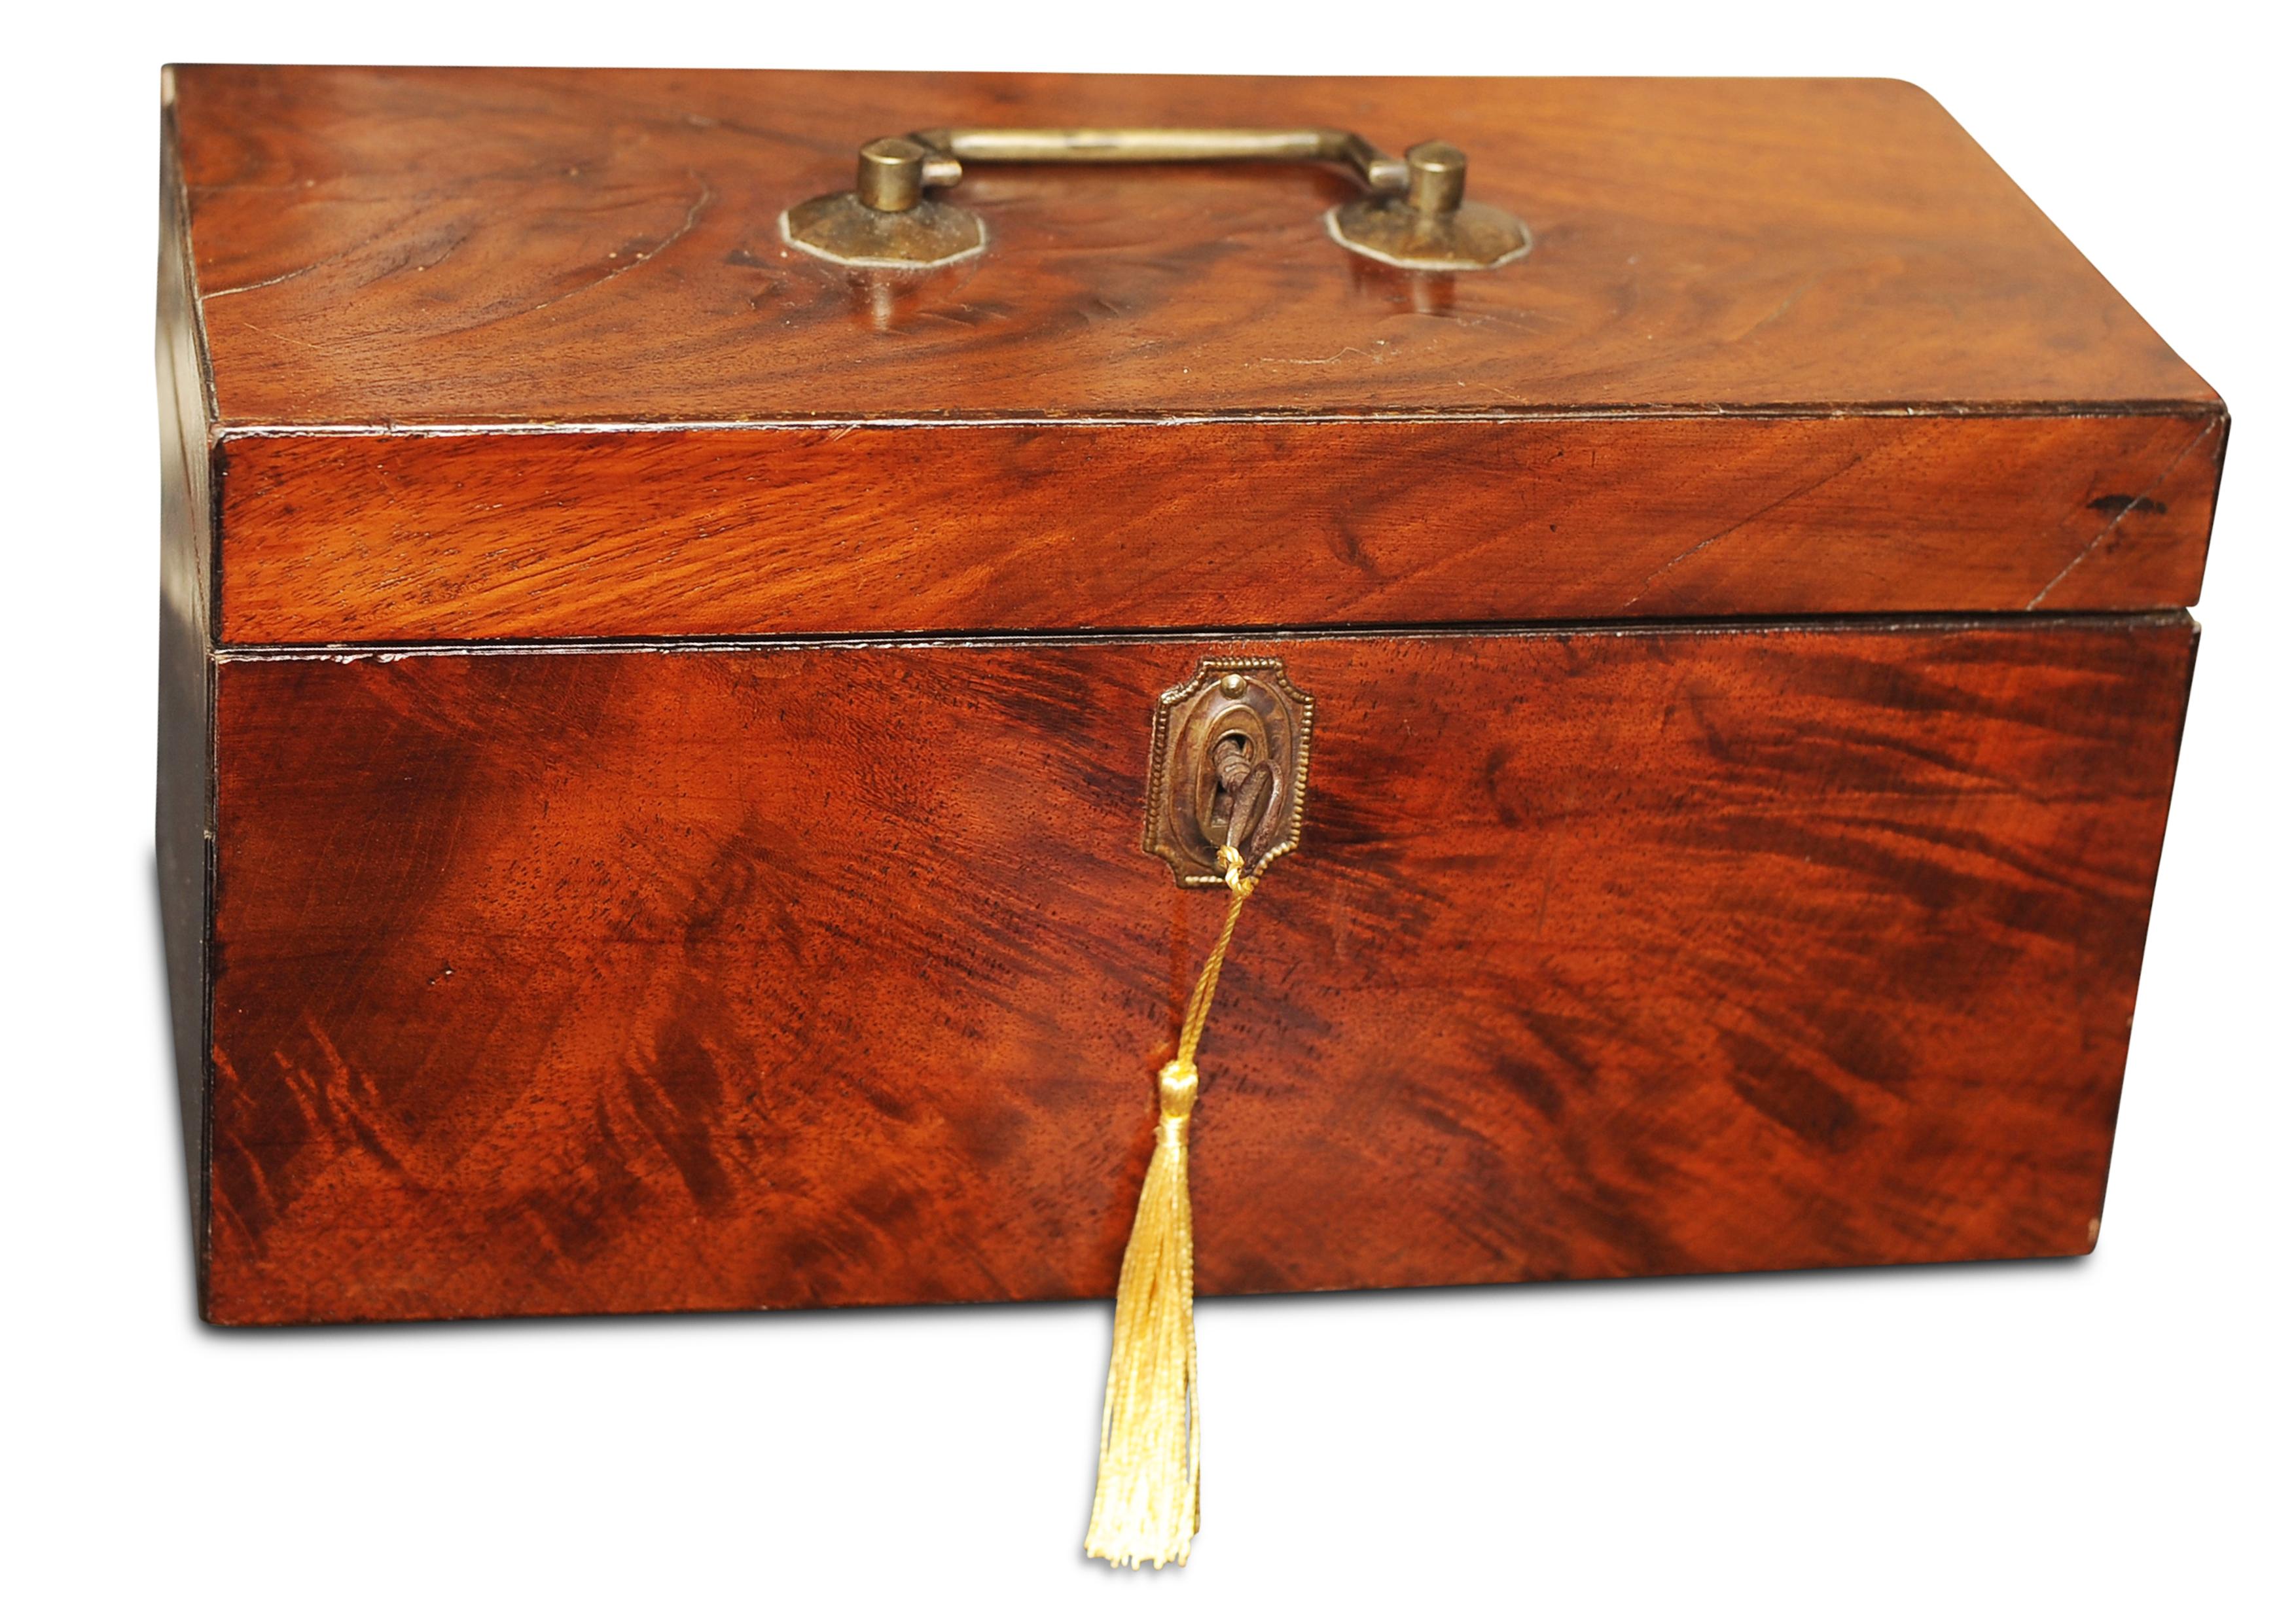 Regency period early 19th century flame mahogany tea caddy box with swing handle complete with an original hallmarked sterling silver George III tea caddy spoon

Comes with working key, item opens to reveal a fitted interior with twin caddies &